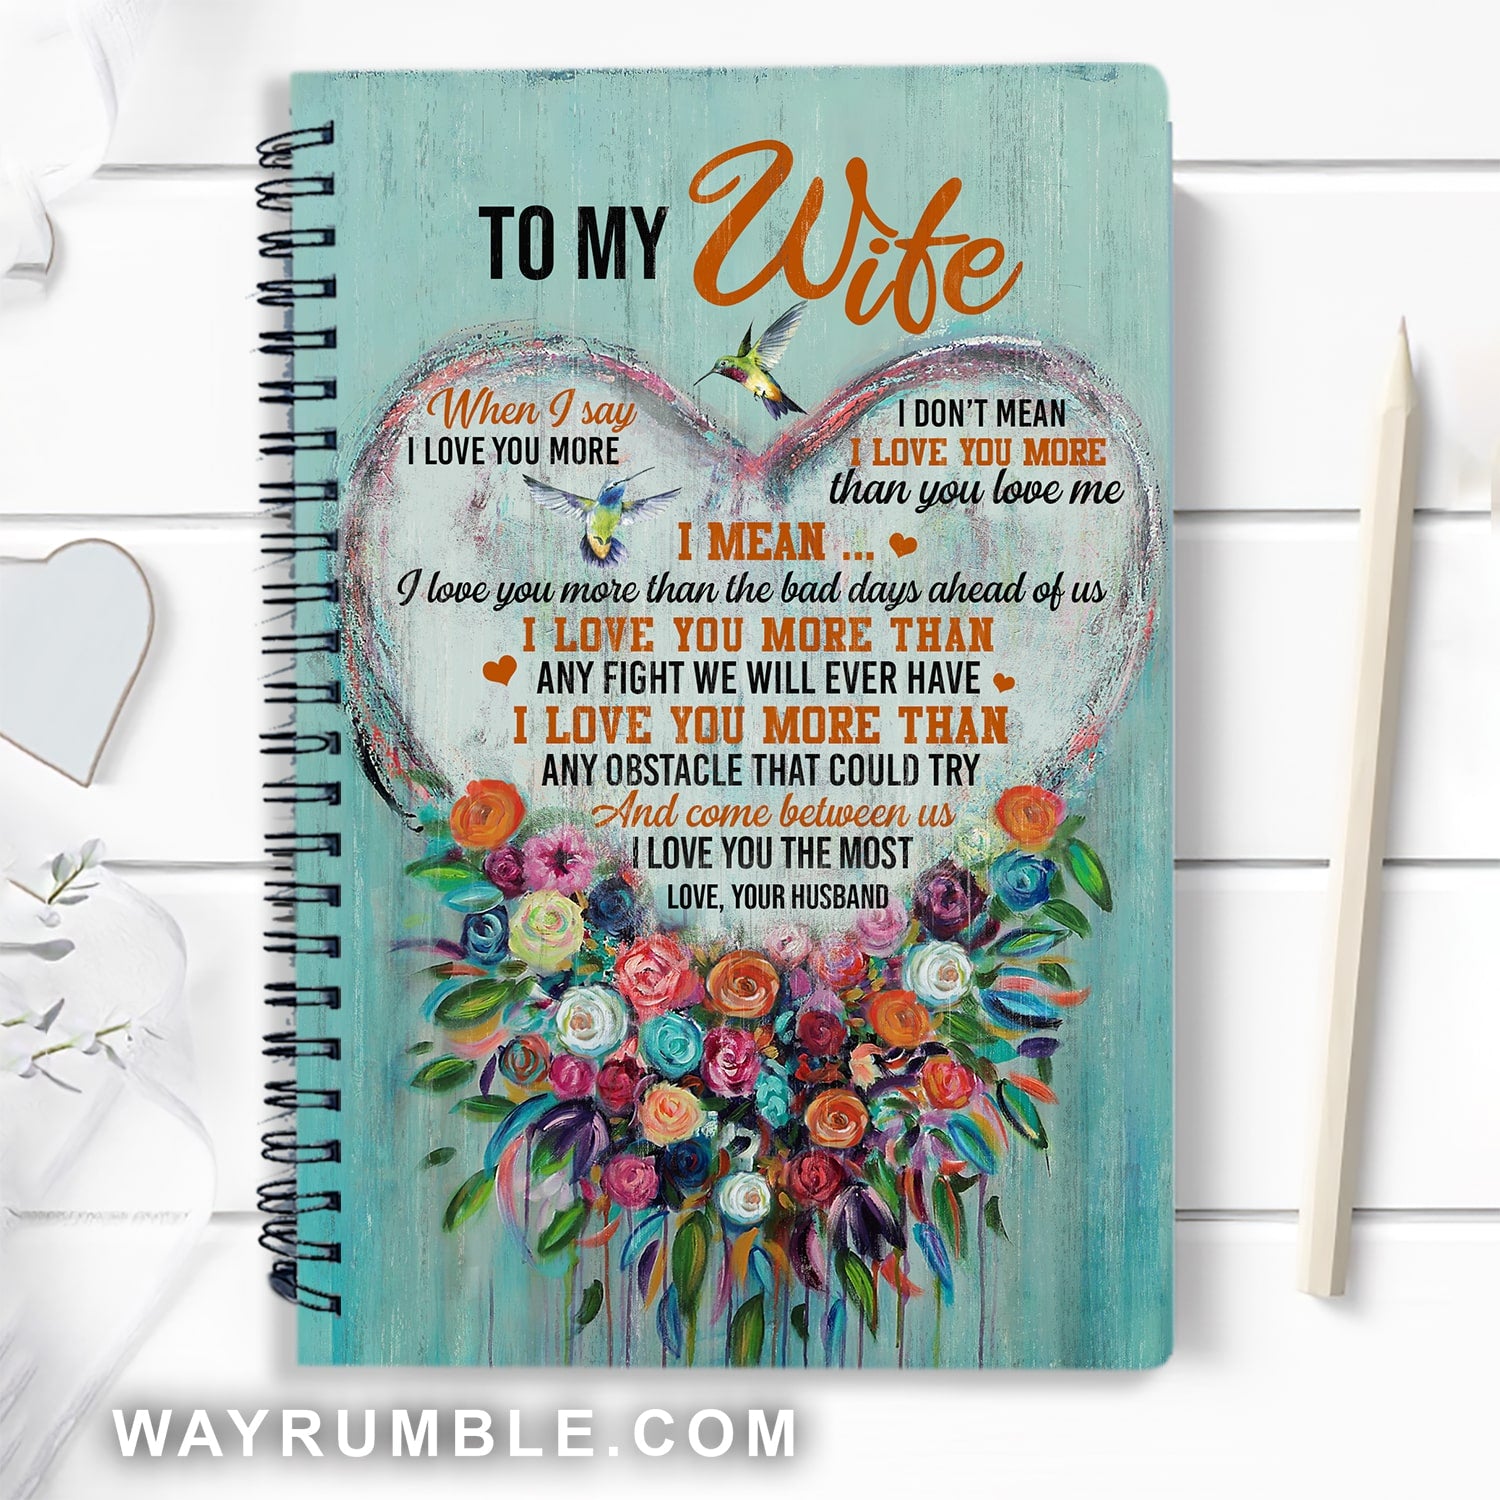 To my wife, Heart shape painting, Rose drawing, I love you the most - Couple Spiral Journal